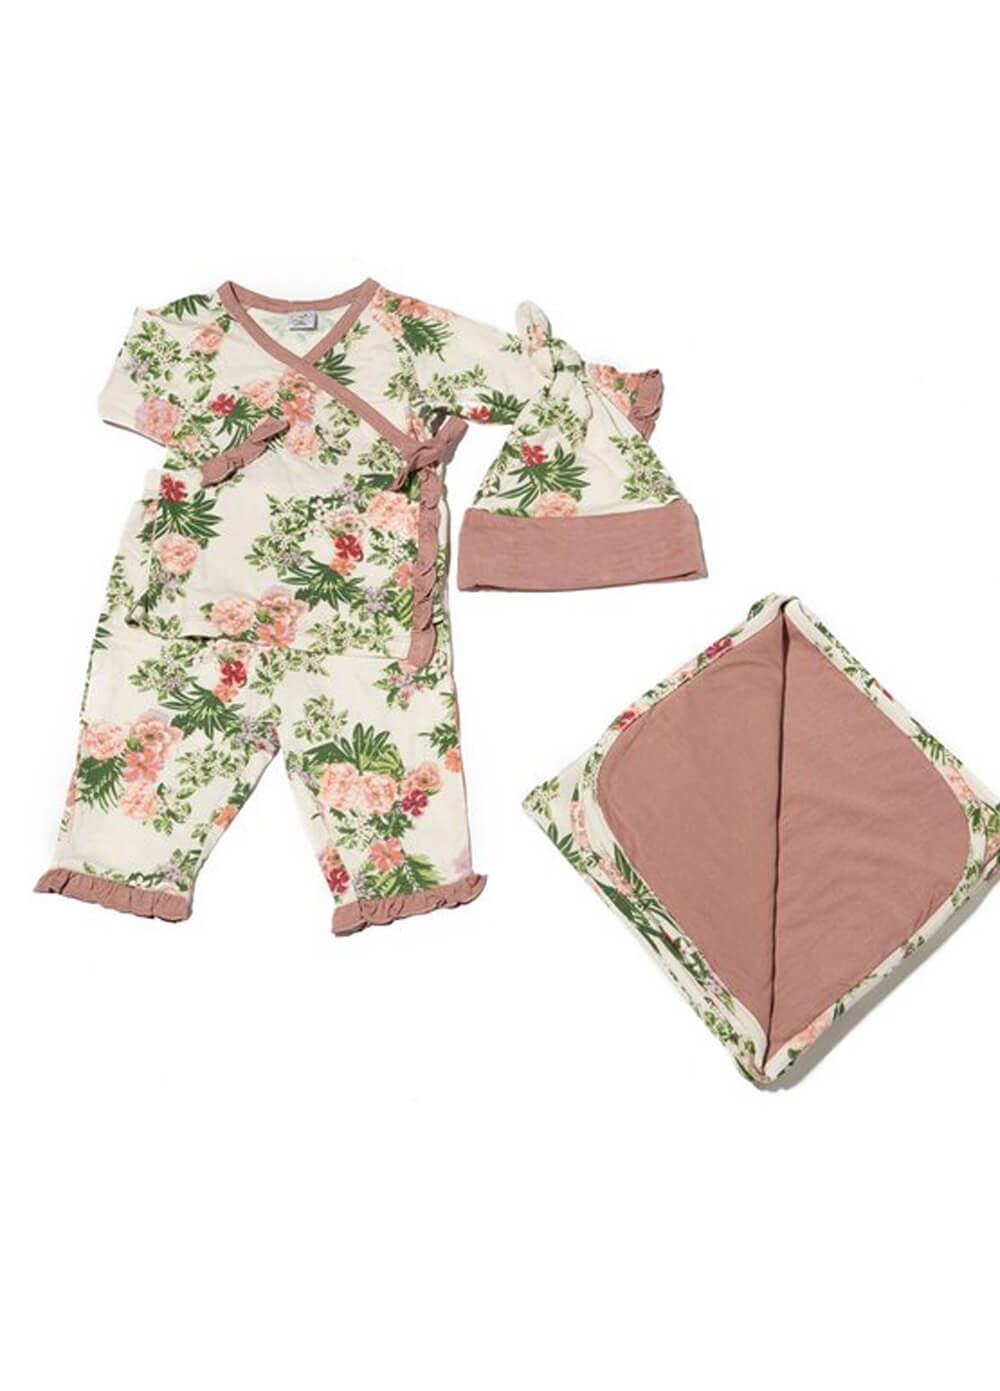 Baby Ruffle Take-Me-Home 4-Piece Set by Everly Grey 